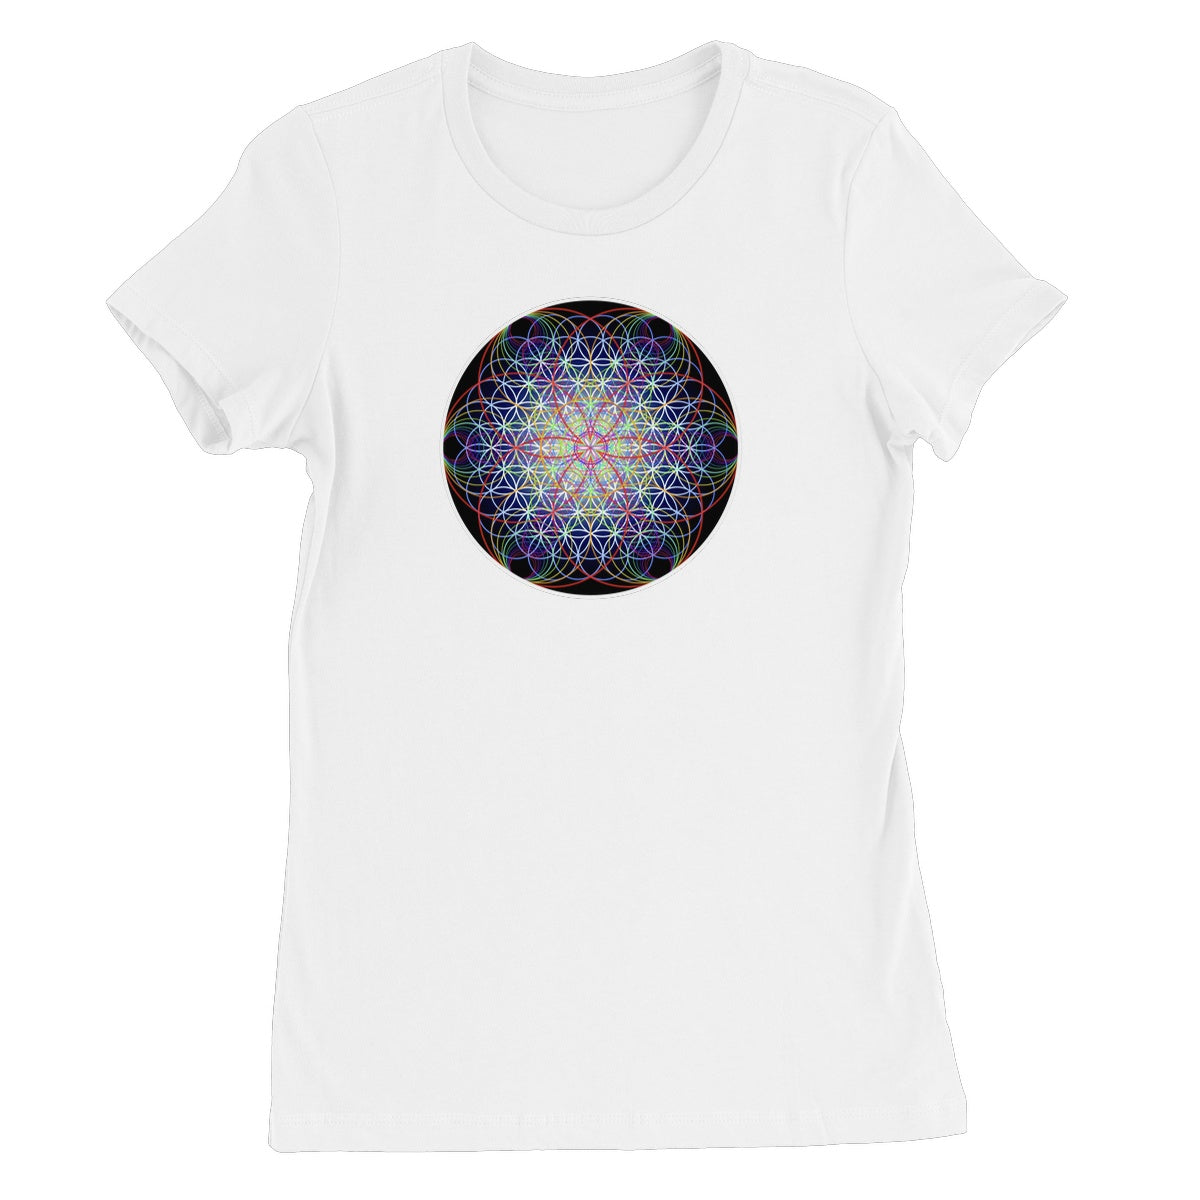 Sound Waves Resonating within the Flower of Life Women's Favourite T-Shirt